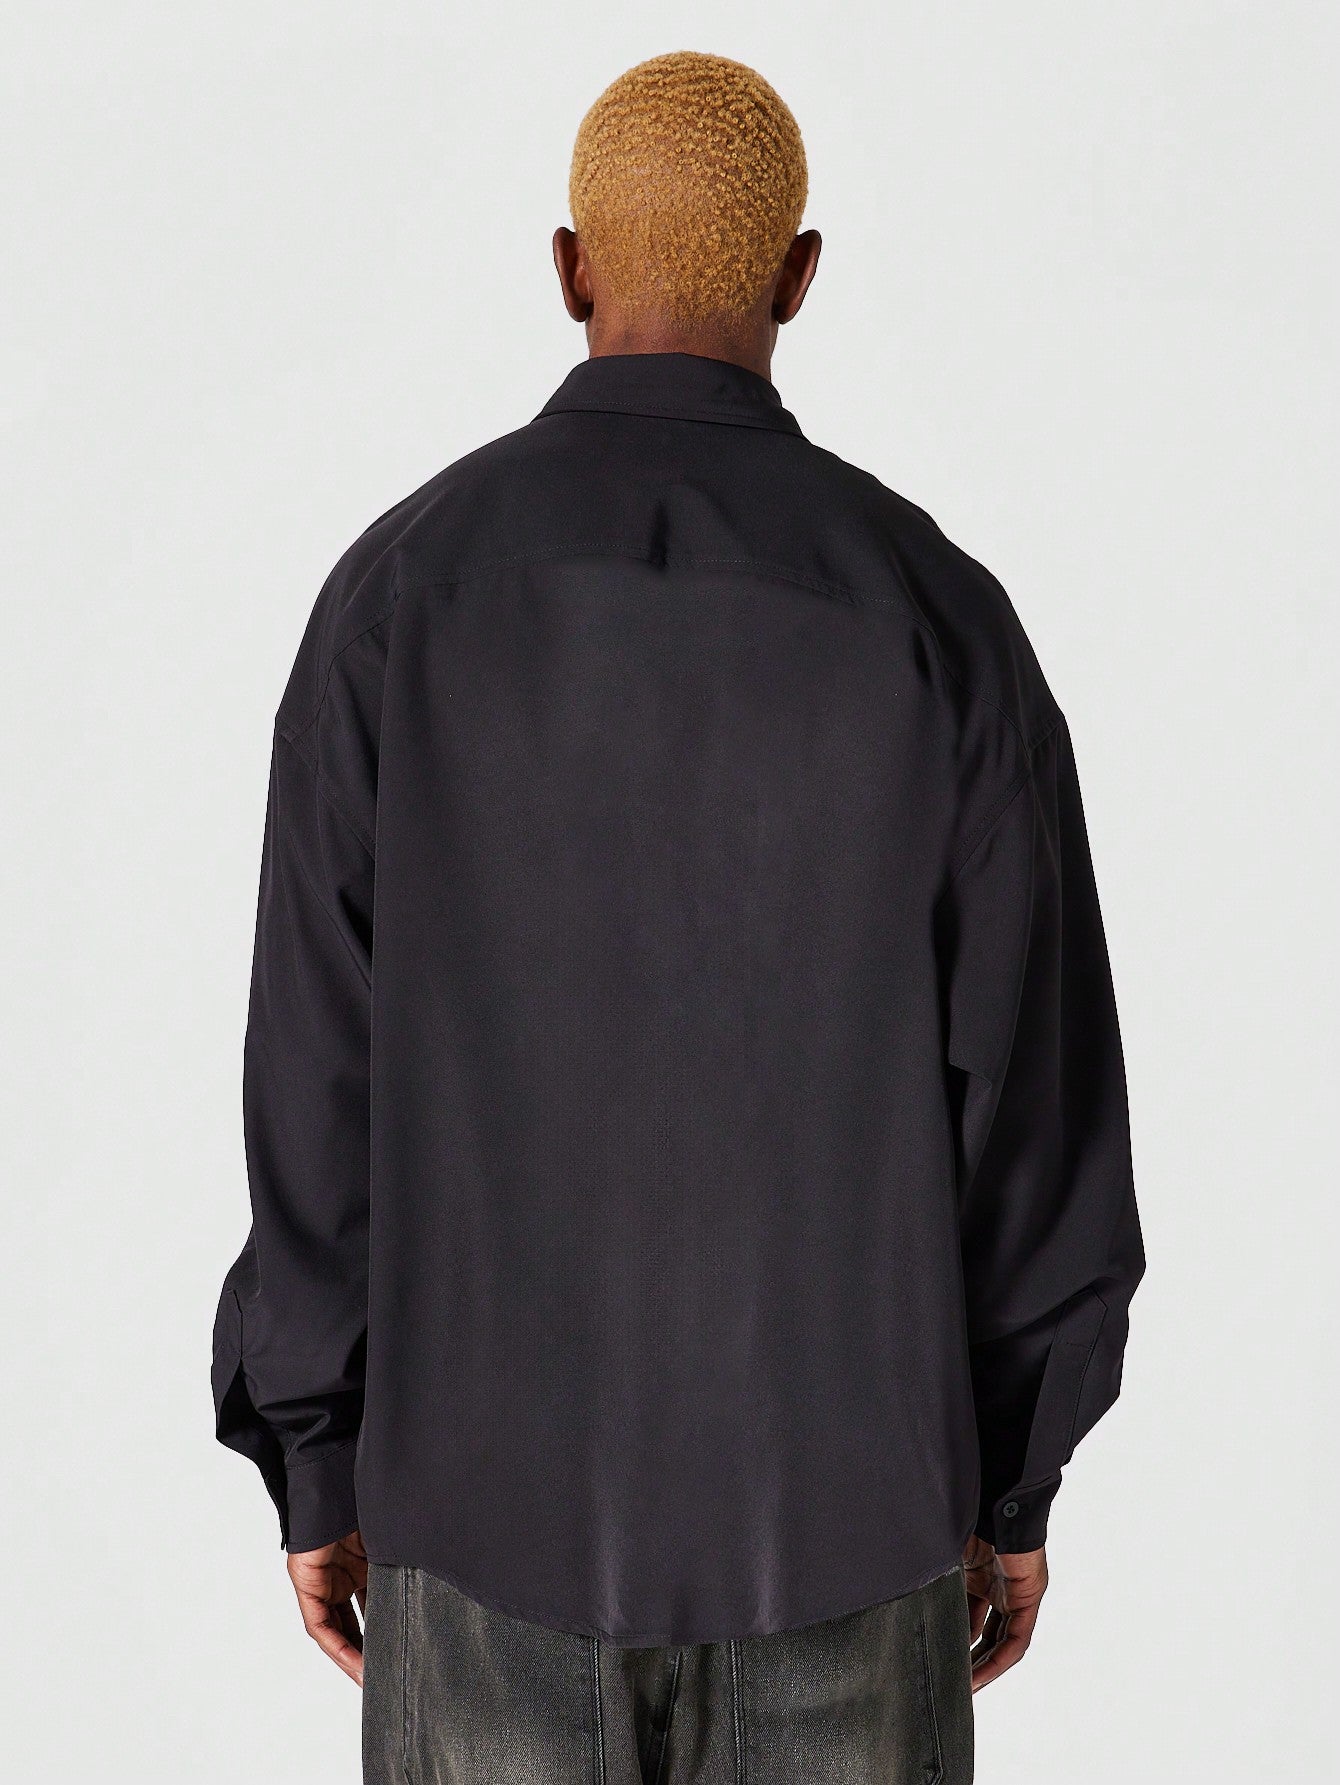 Oversized Fit Shirt With Badge Pocket